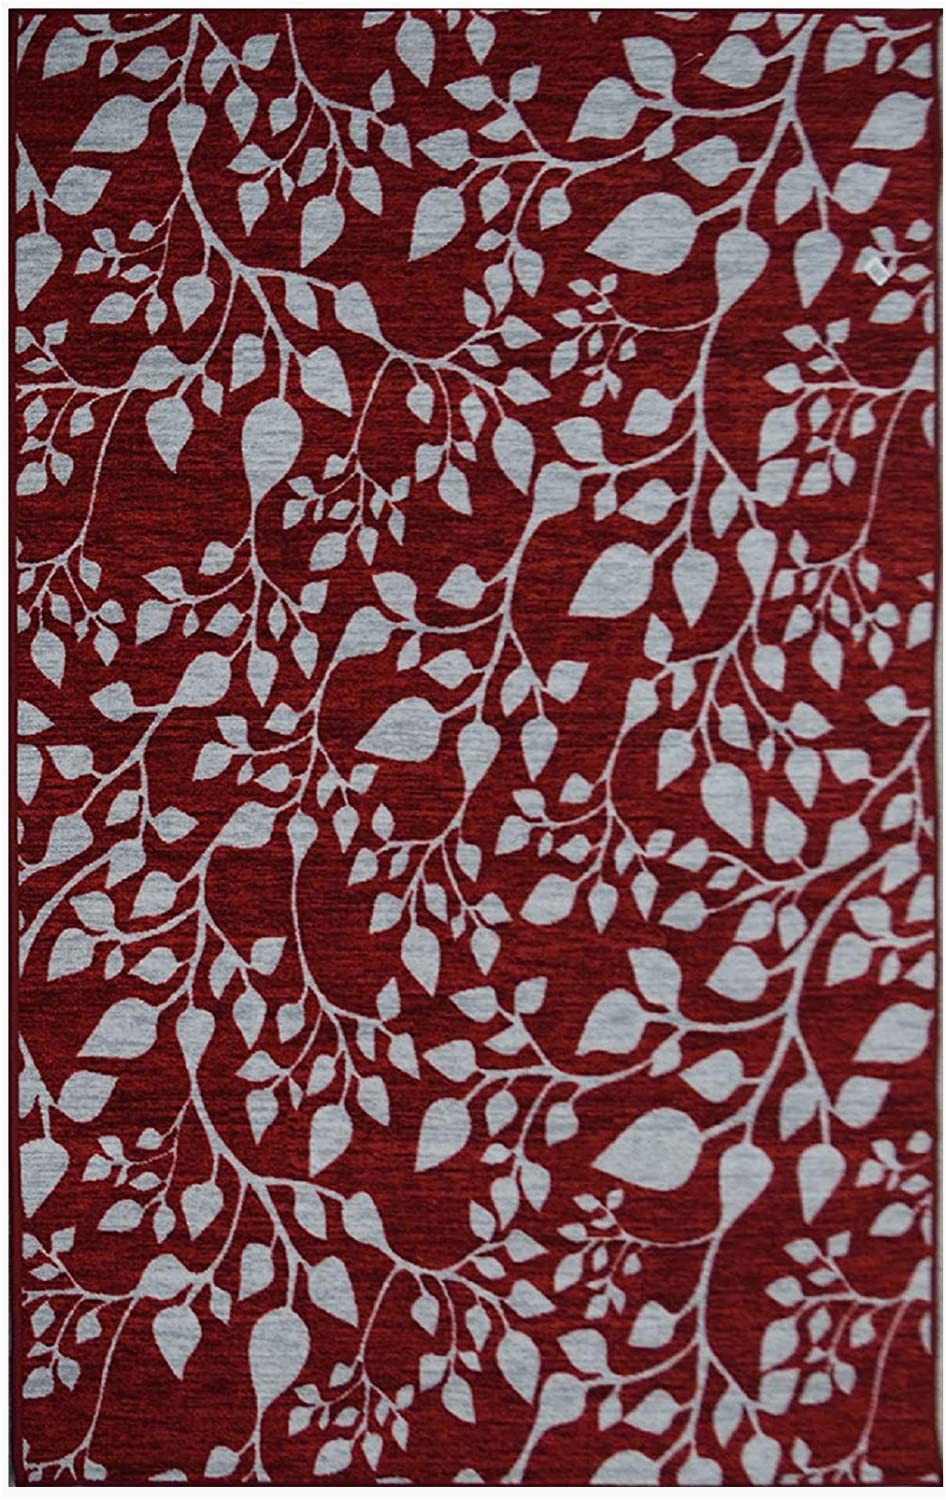 Maroon and Gray area Rugs Amazon Reversible Rugs Red Burgundy Gray Modern Leaf